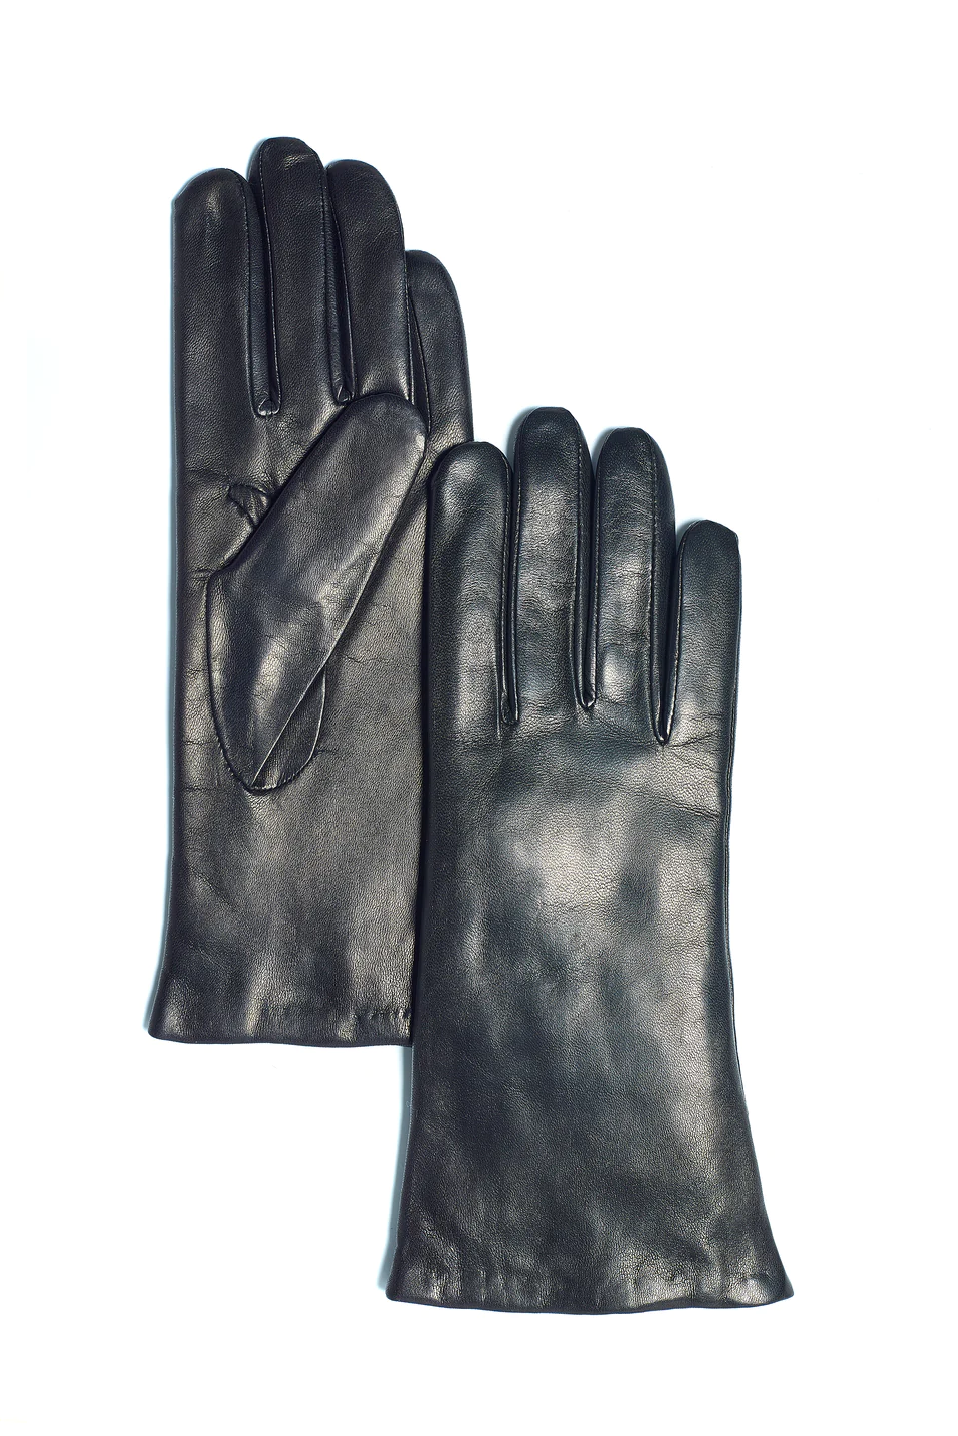 Brume Sydney Cashmere Lined Leather Glove